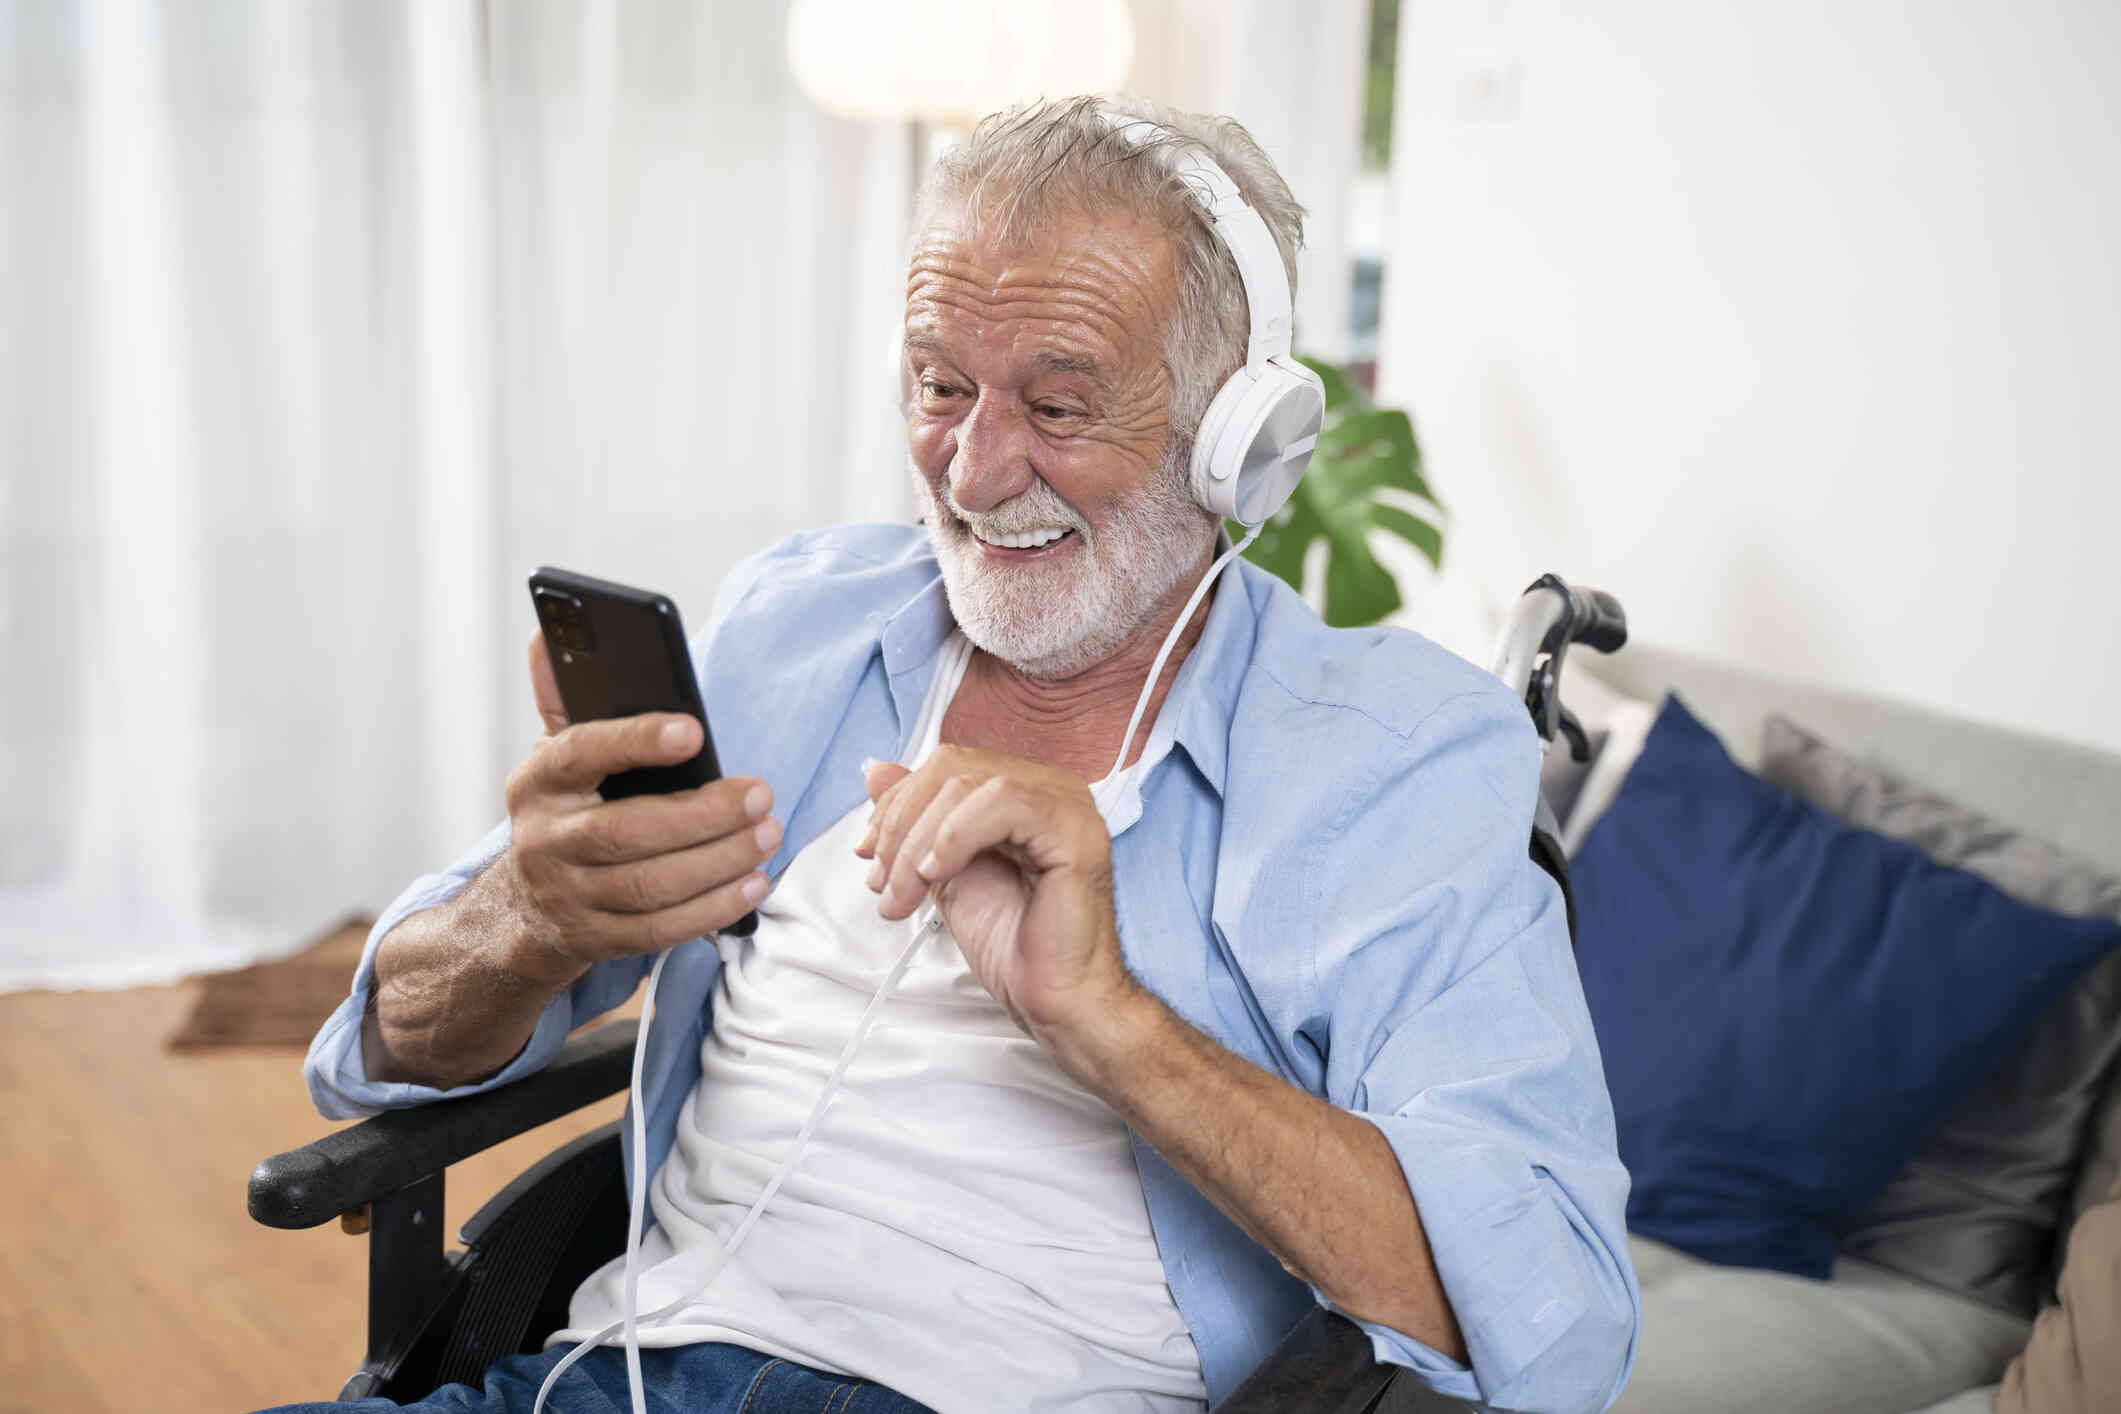 An elderly man in a wheelchair sits in his living room and smiles brightly at the cellphone in his hand while wearing white headphones.